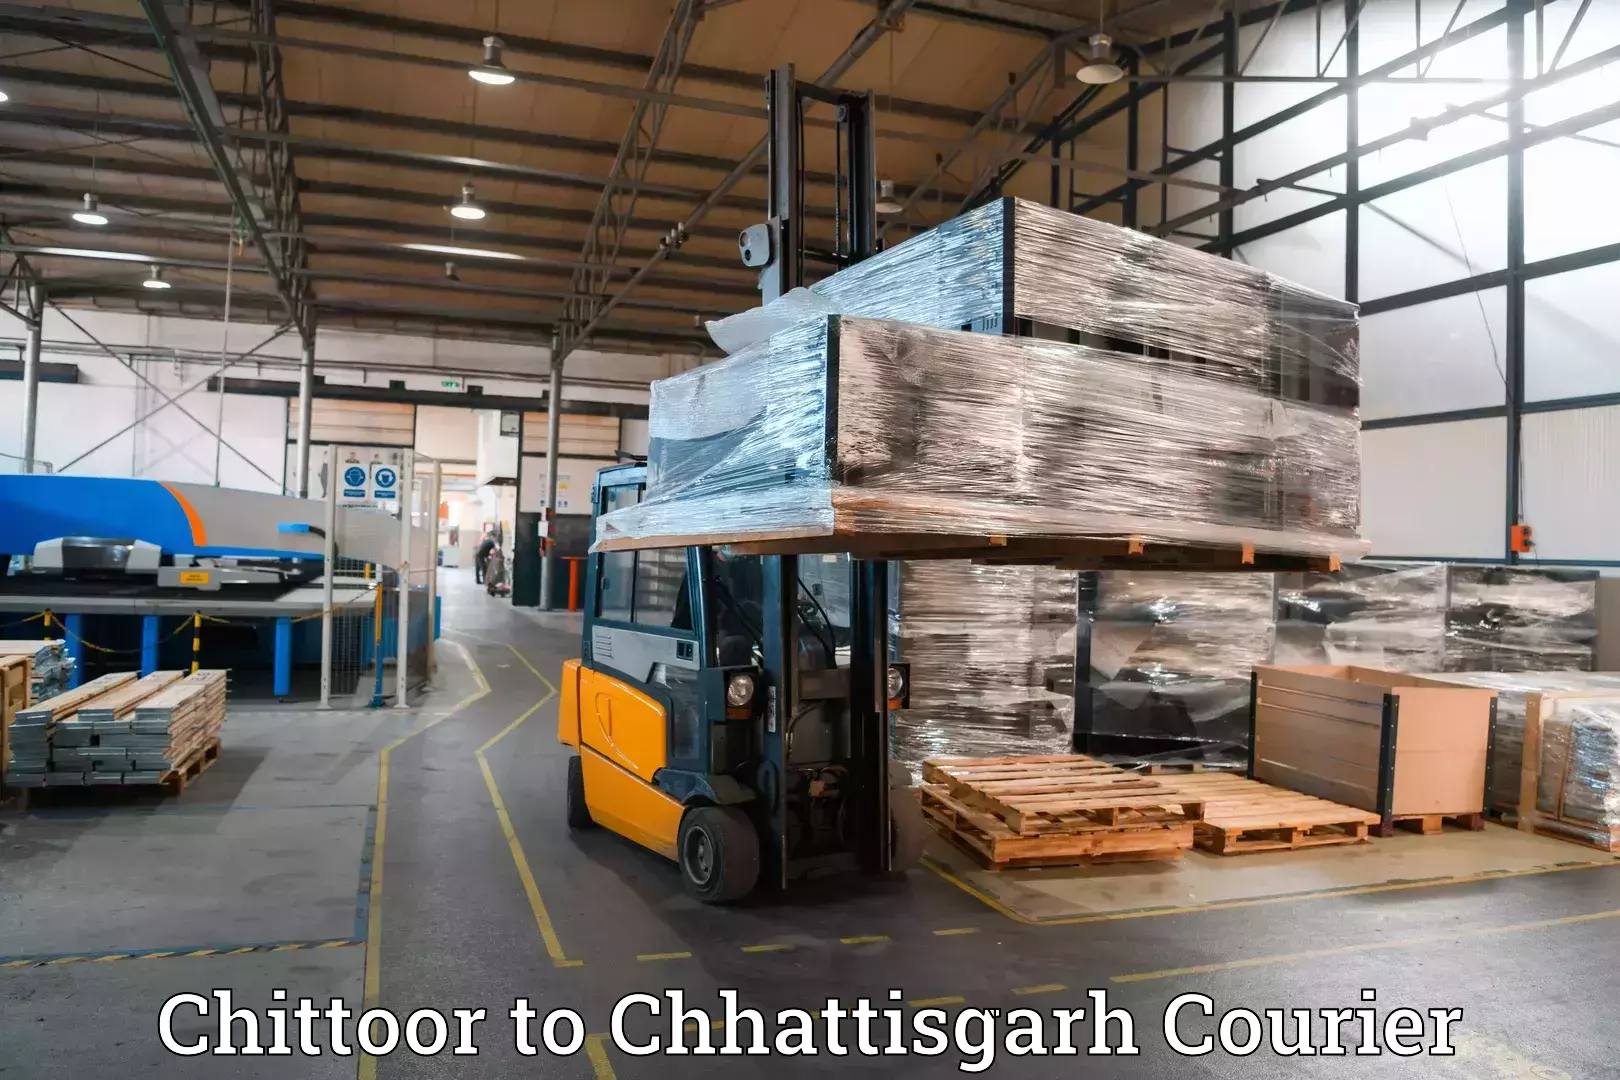 Luggage transport consultancy Chittoor to Jagdalpur